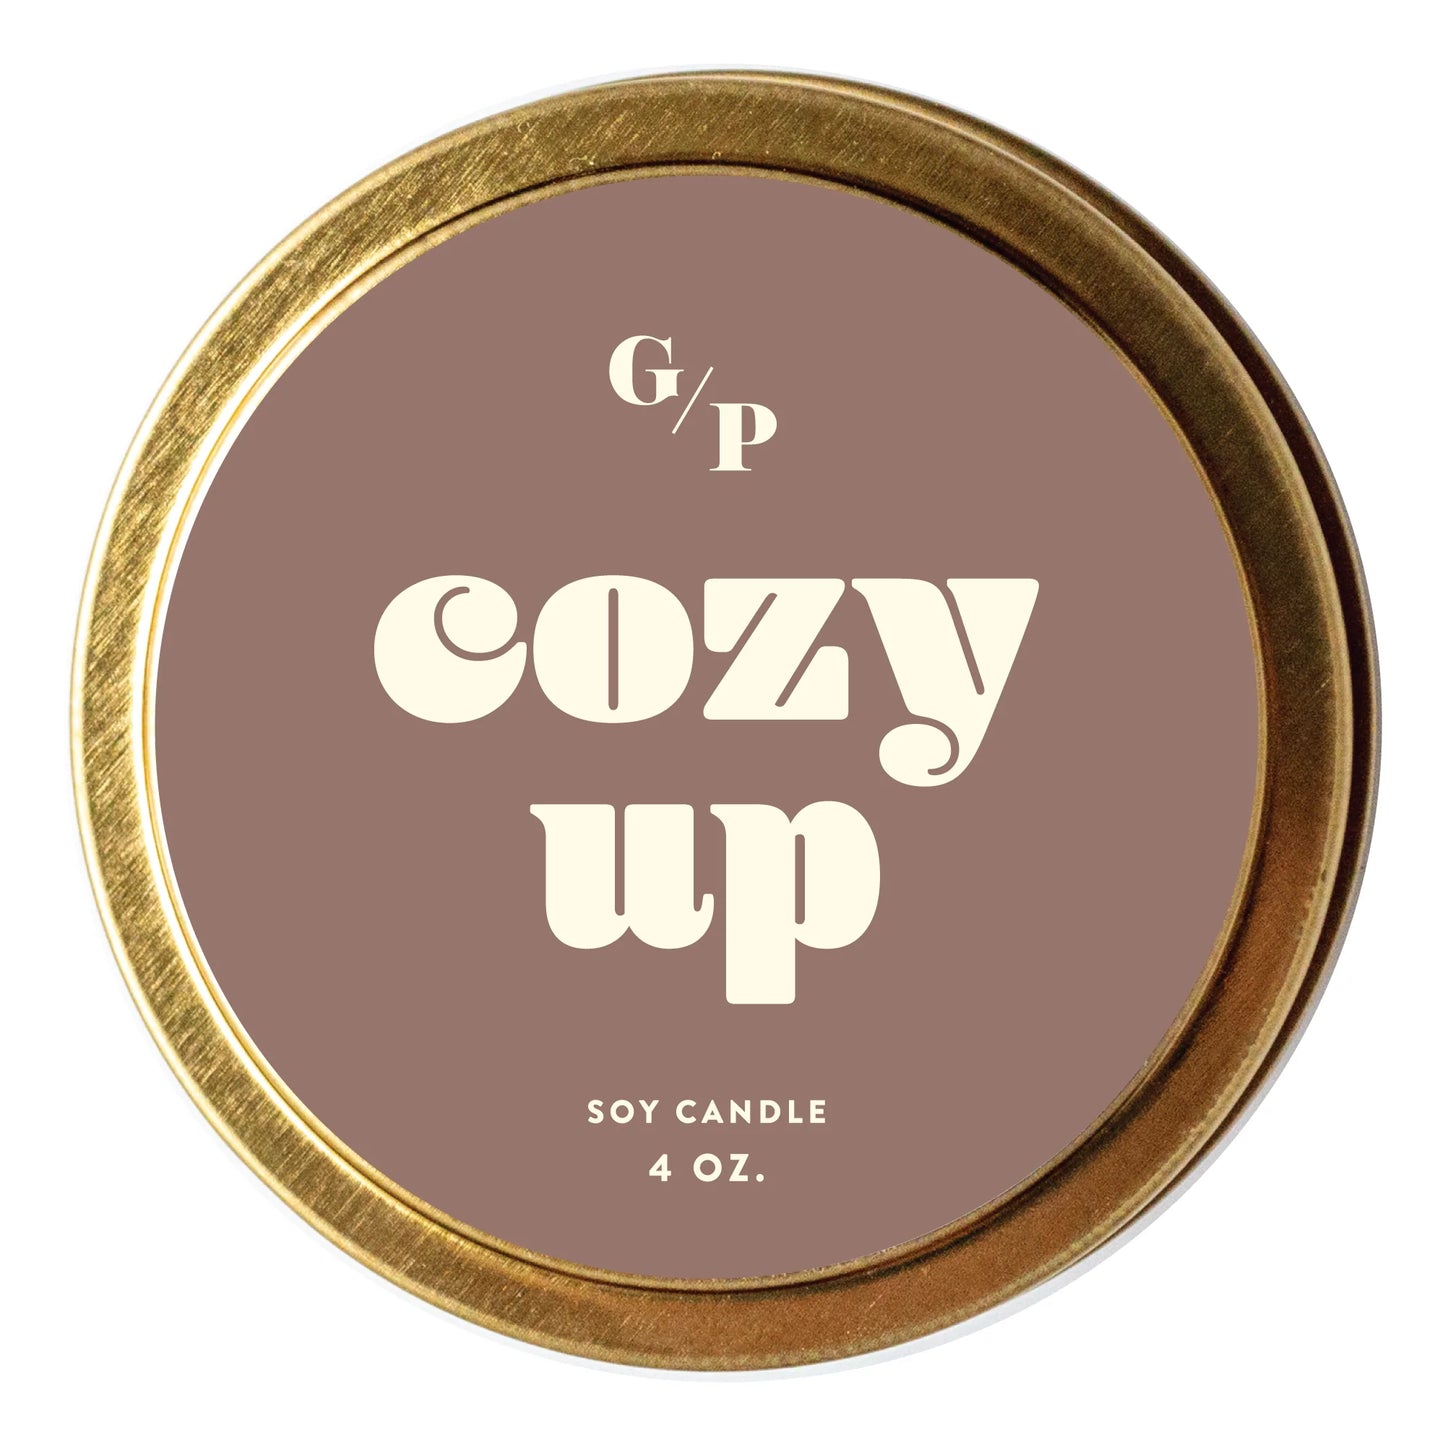 G/P Cozy Up 4oz Candle